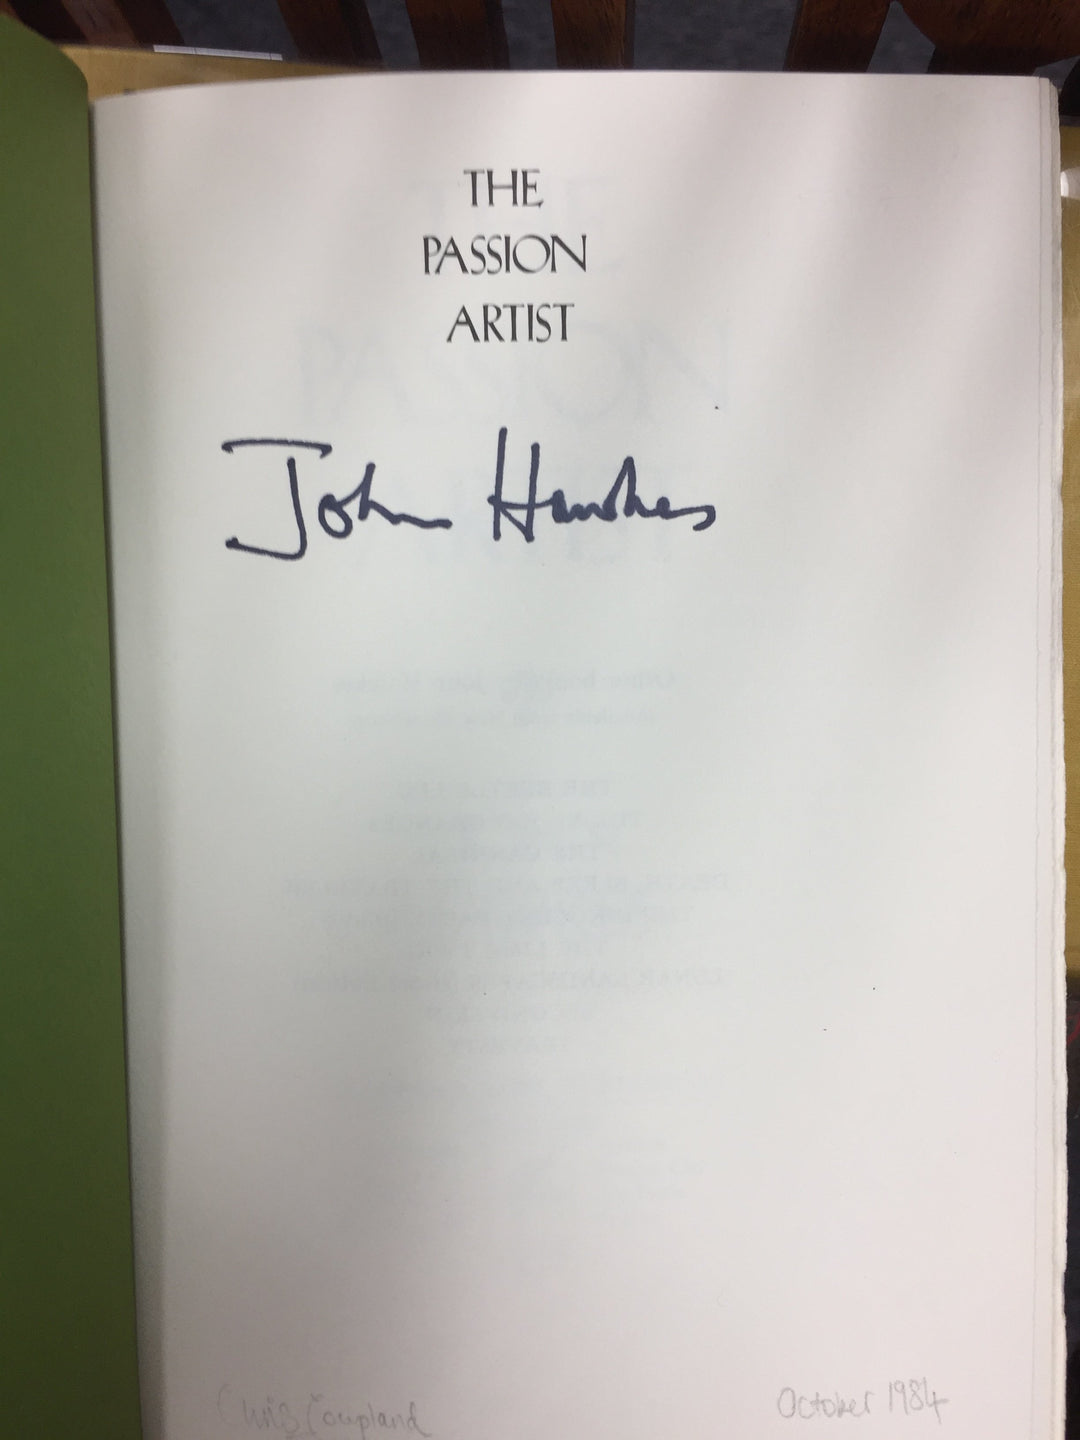 Hawkes, John - The Passion Artist - SIGNED | image6